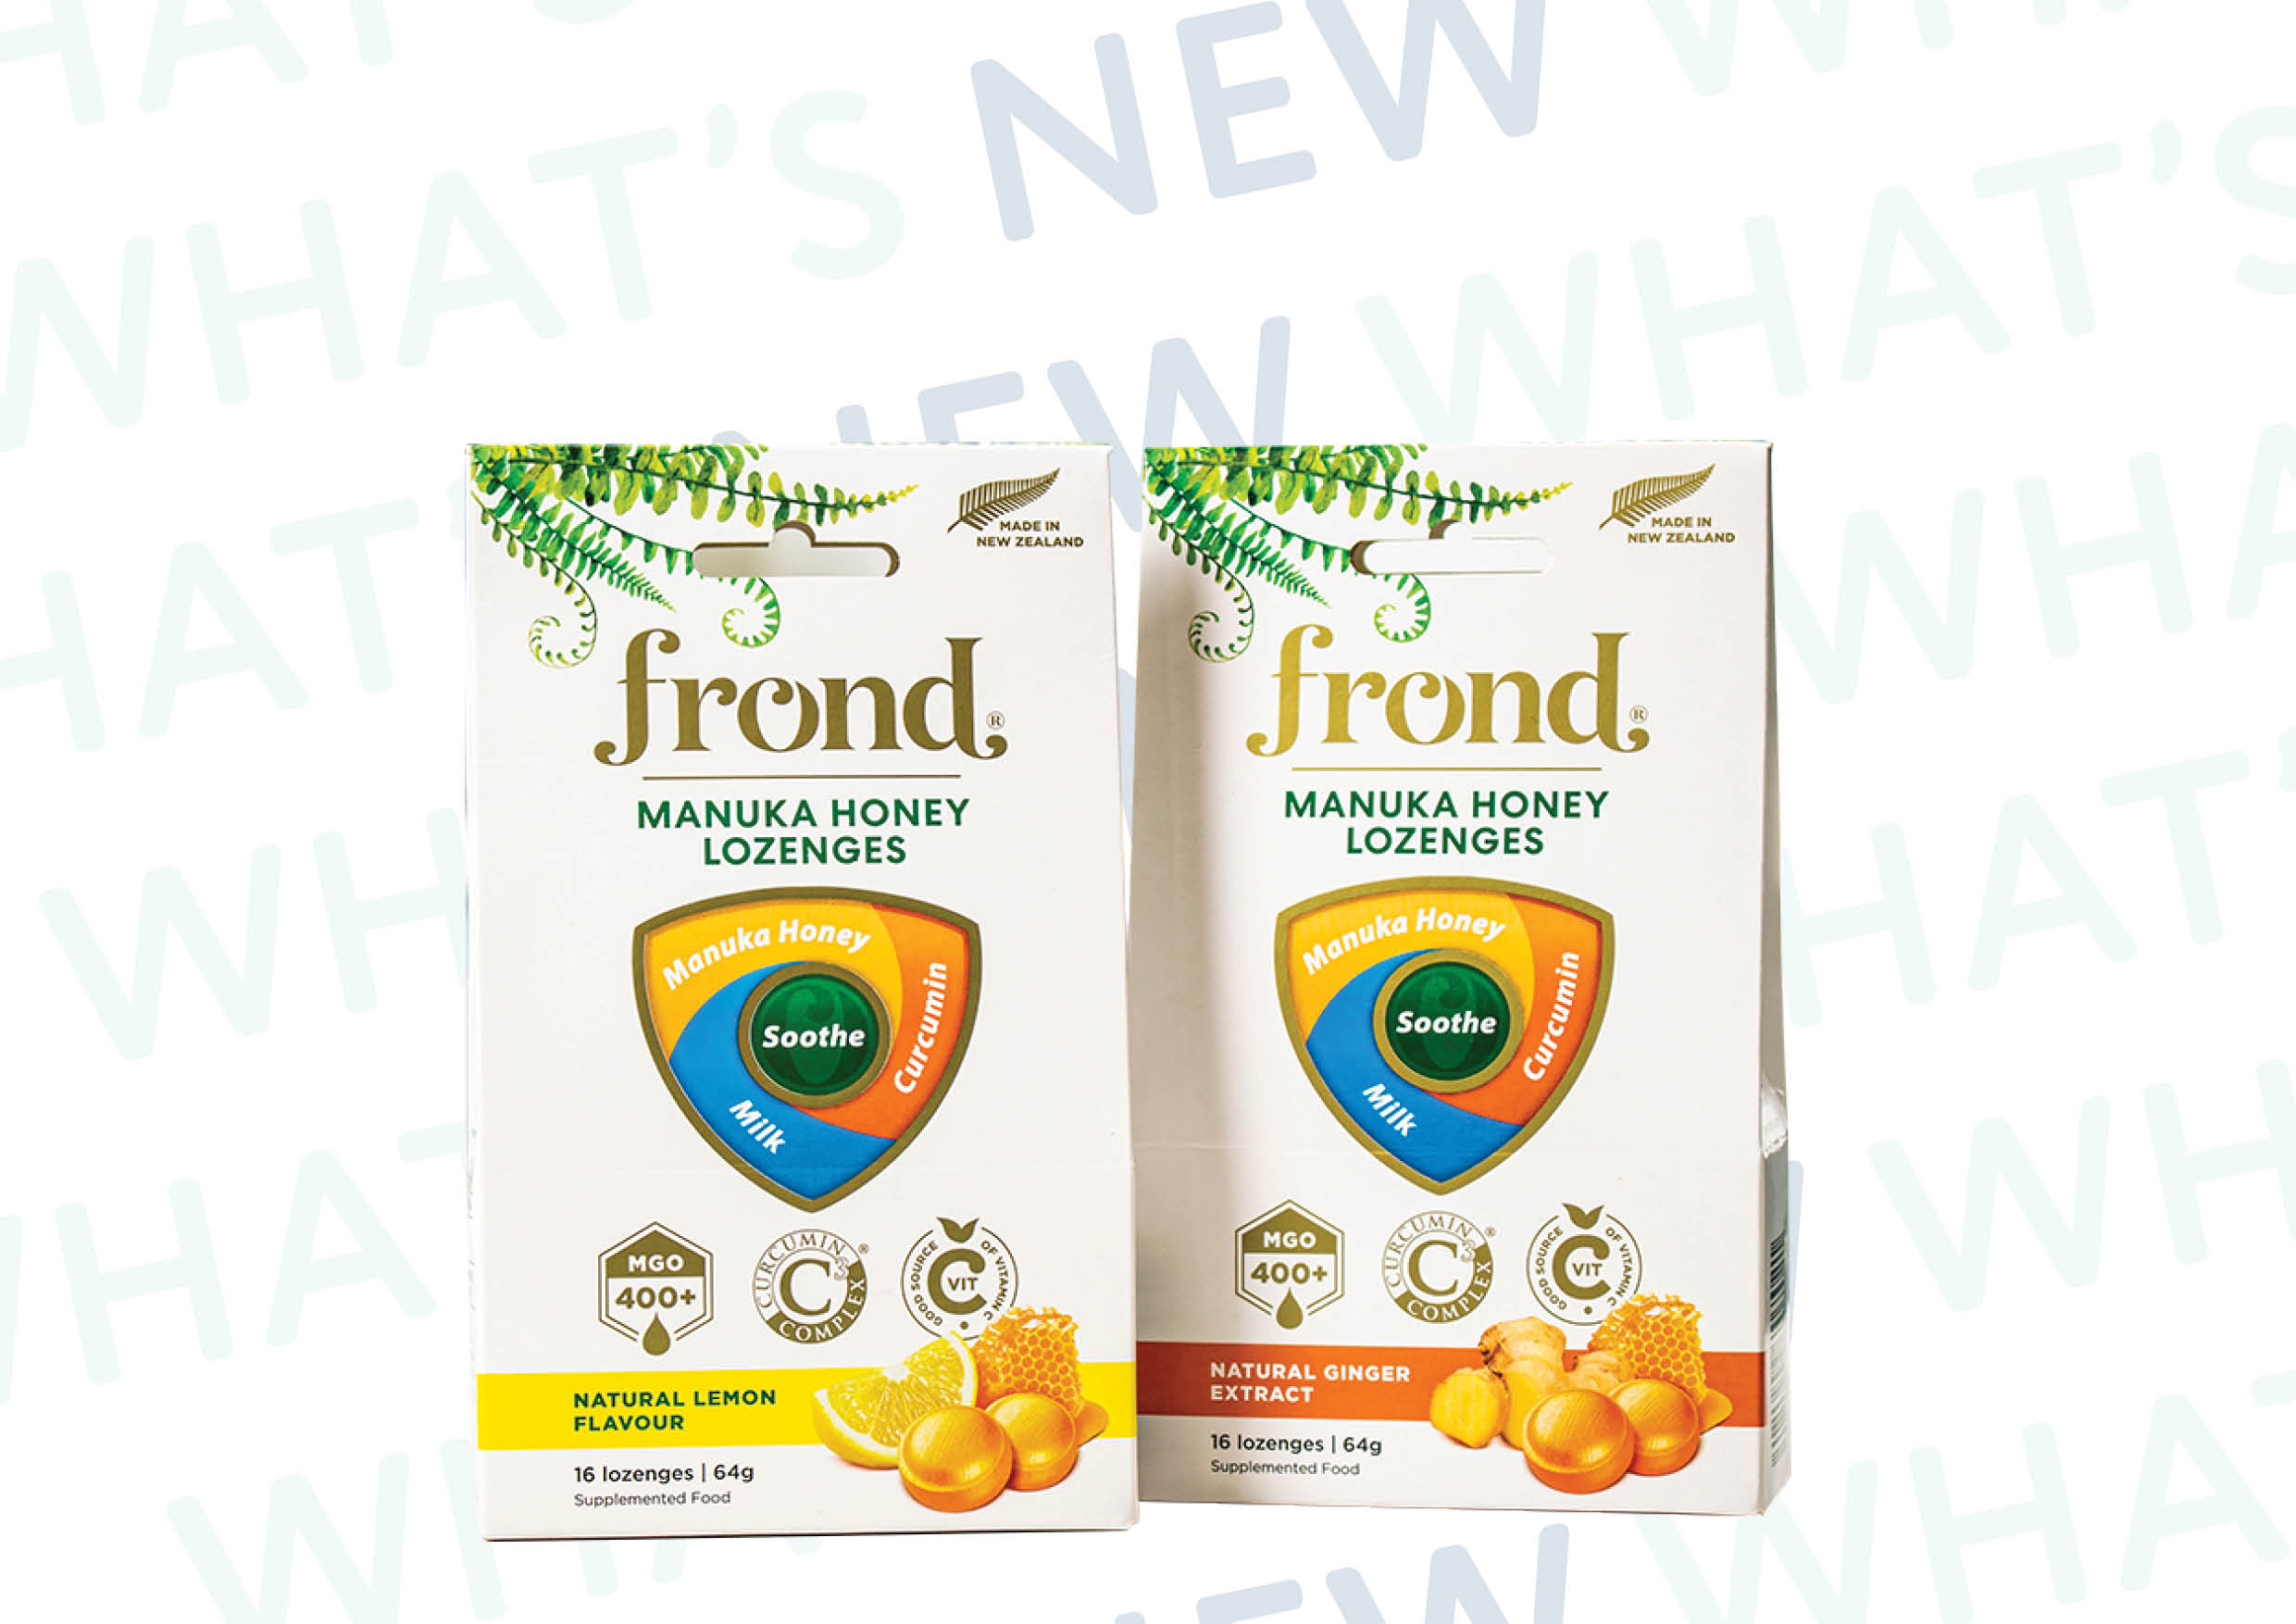 Frond lozenges are available in two appealing flavours - natural lemon and natural ginger. They are individually wrapped and can be purchased in two different package sizes, large and small.